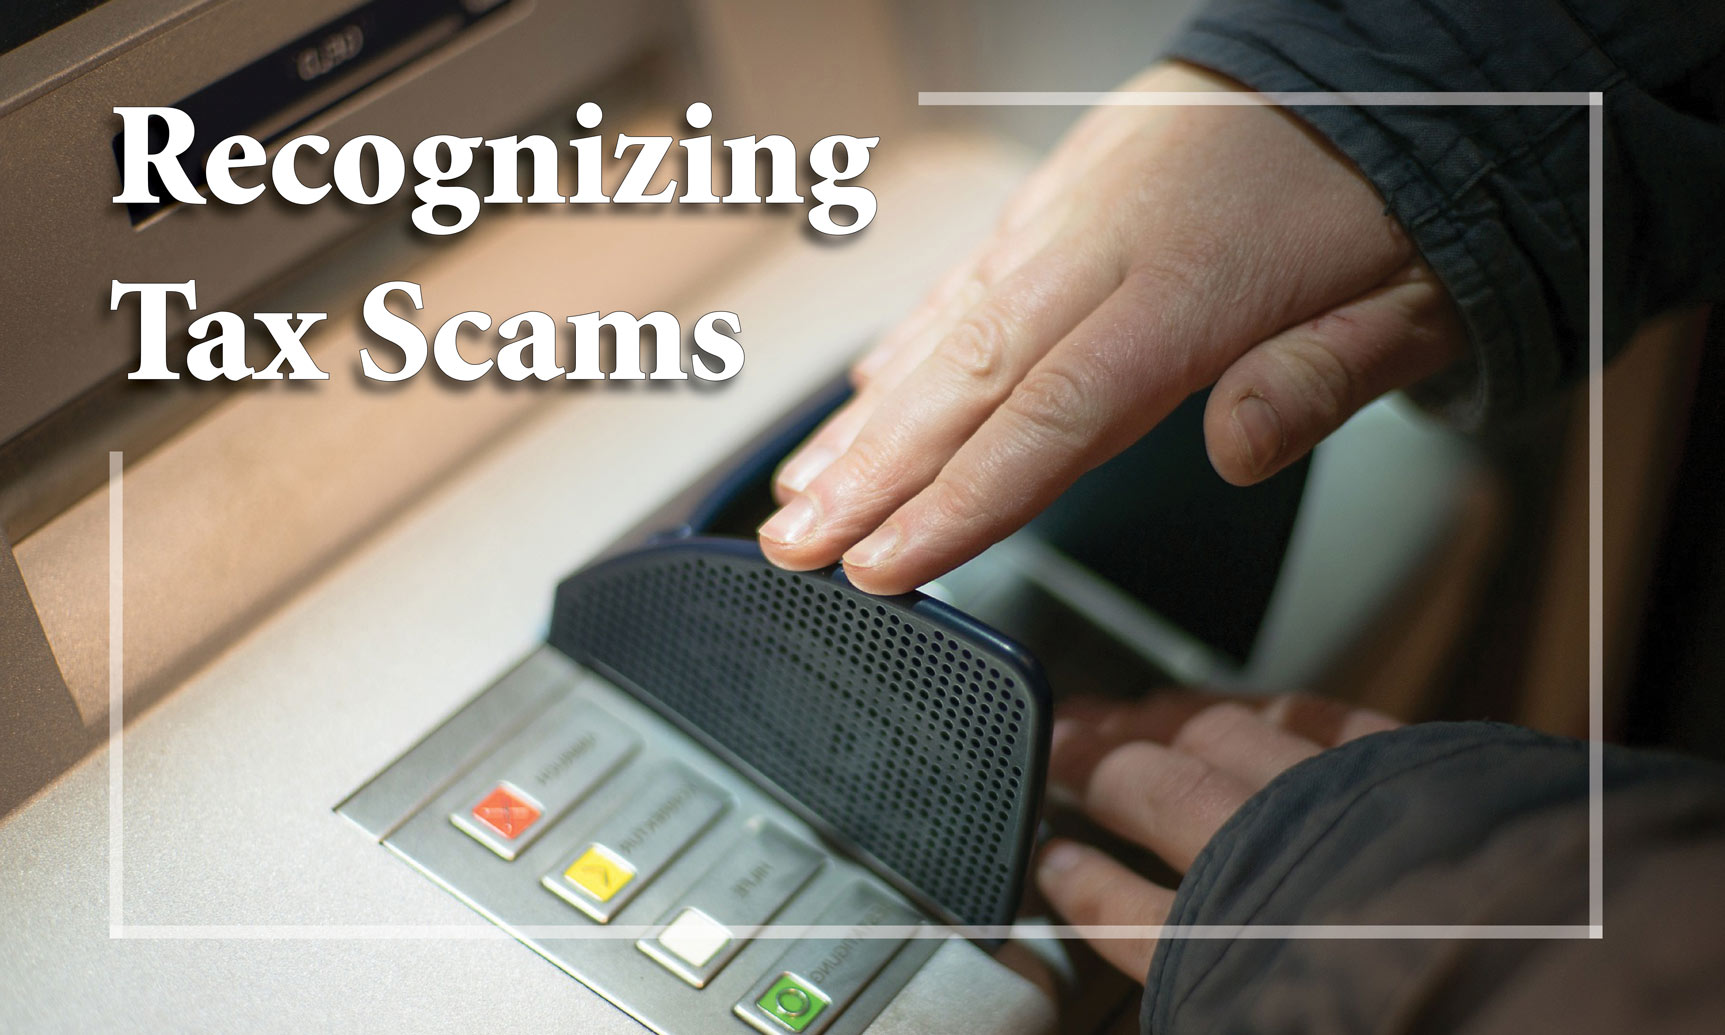 Recognizing Tax Scams